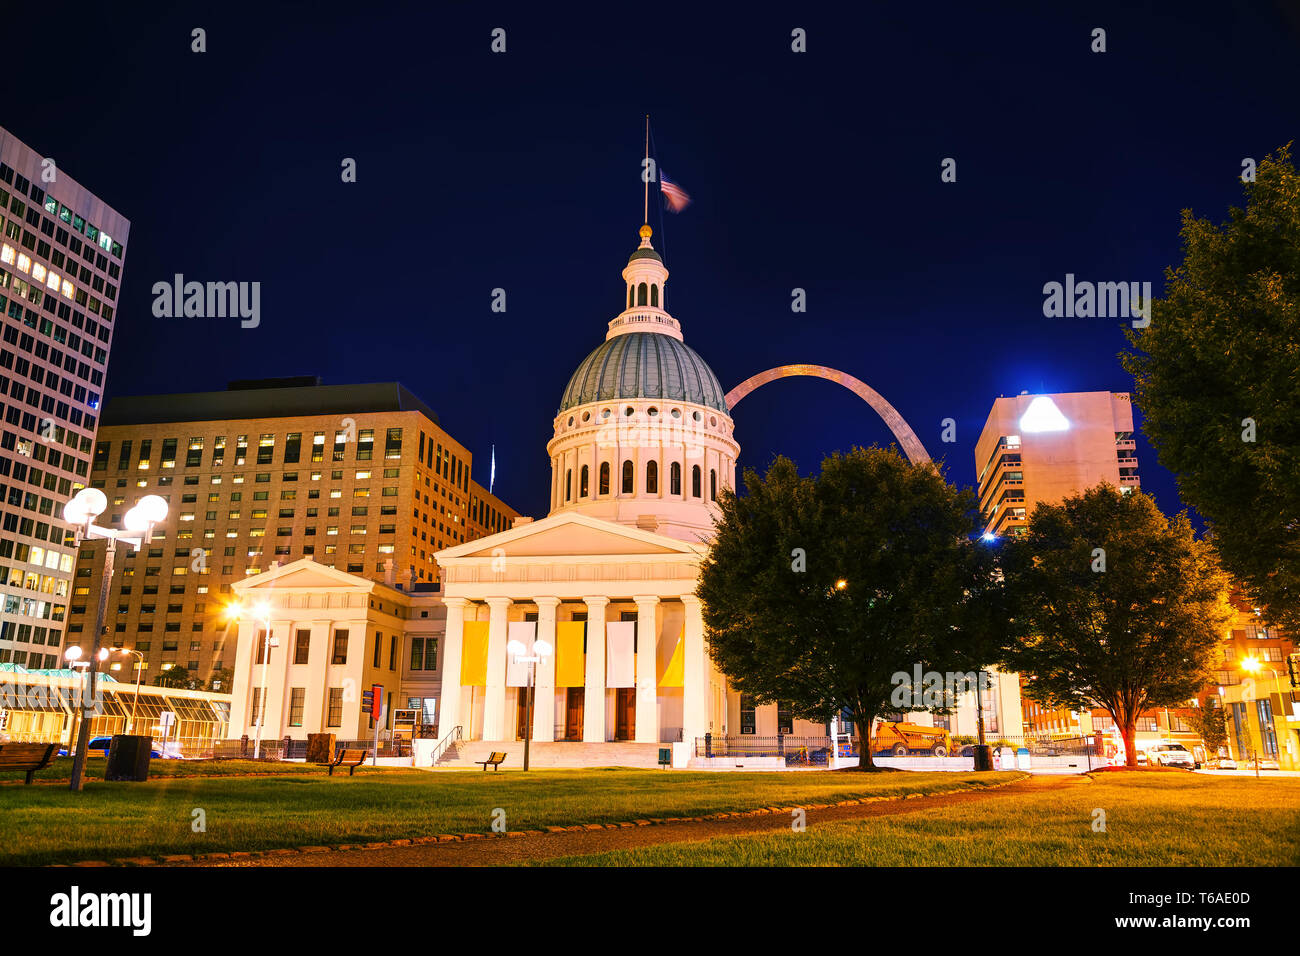 Downtown St Louis, MO with the Old Courthouse Stock Photo